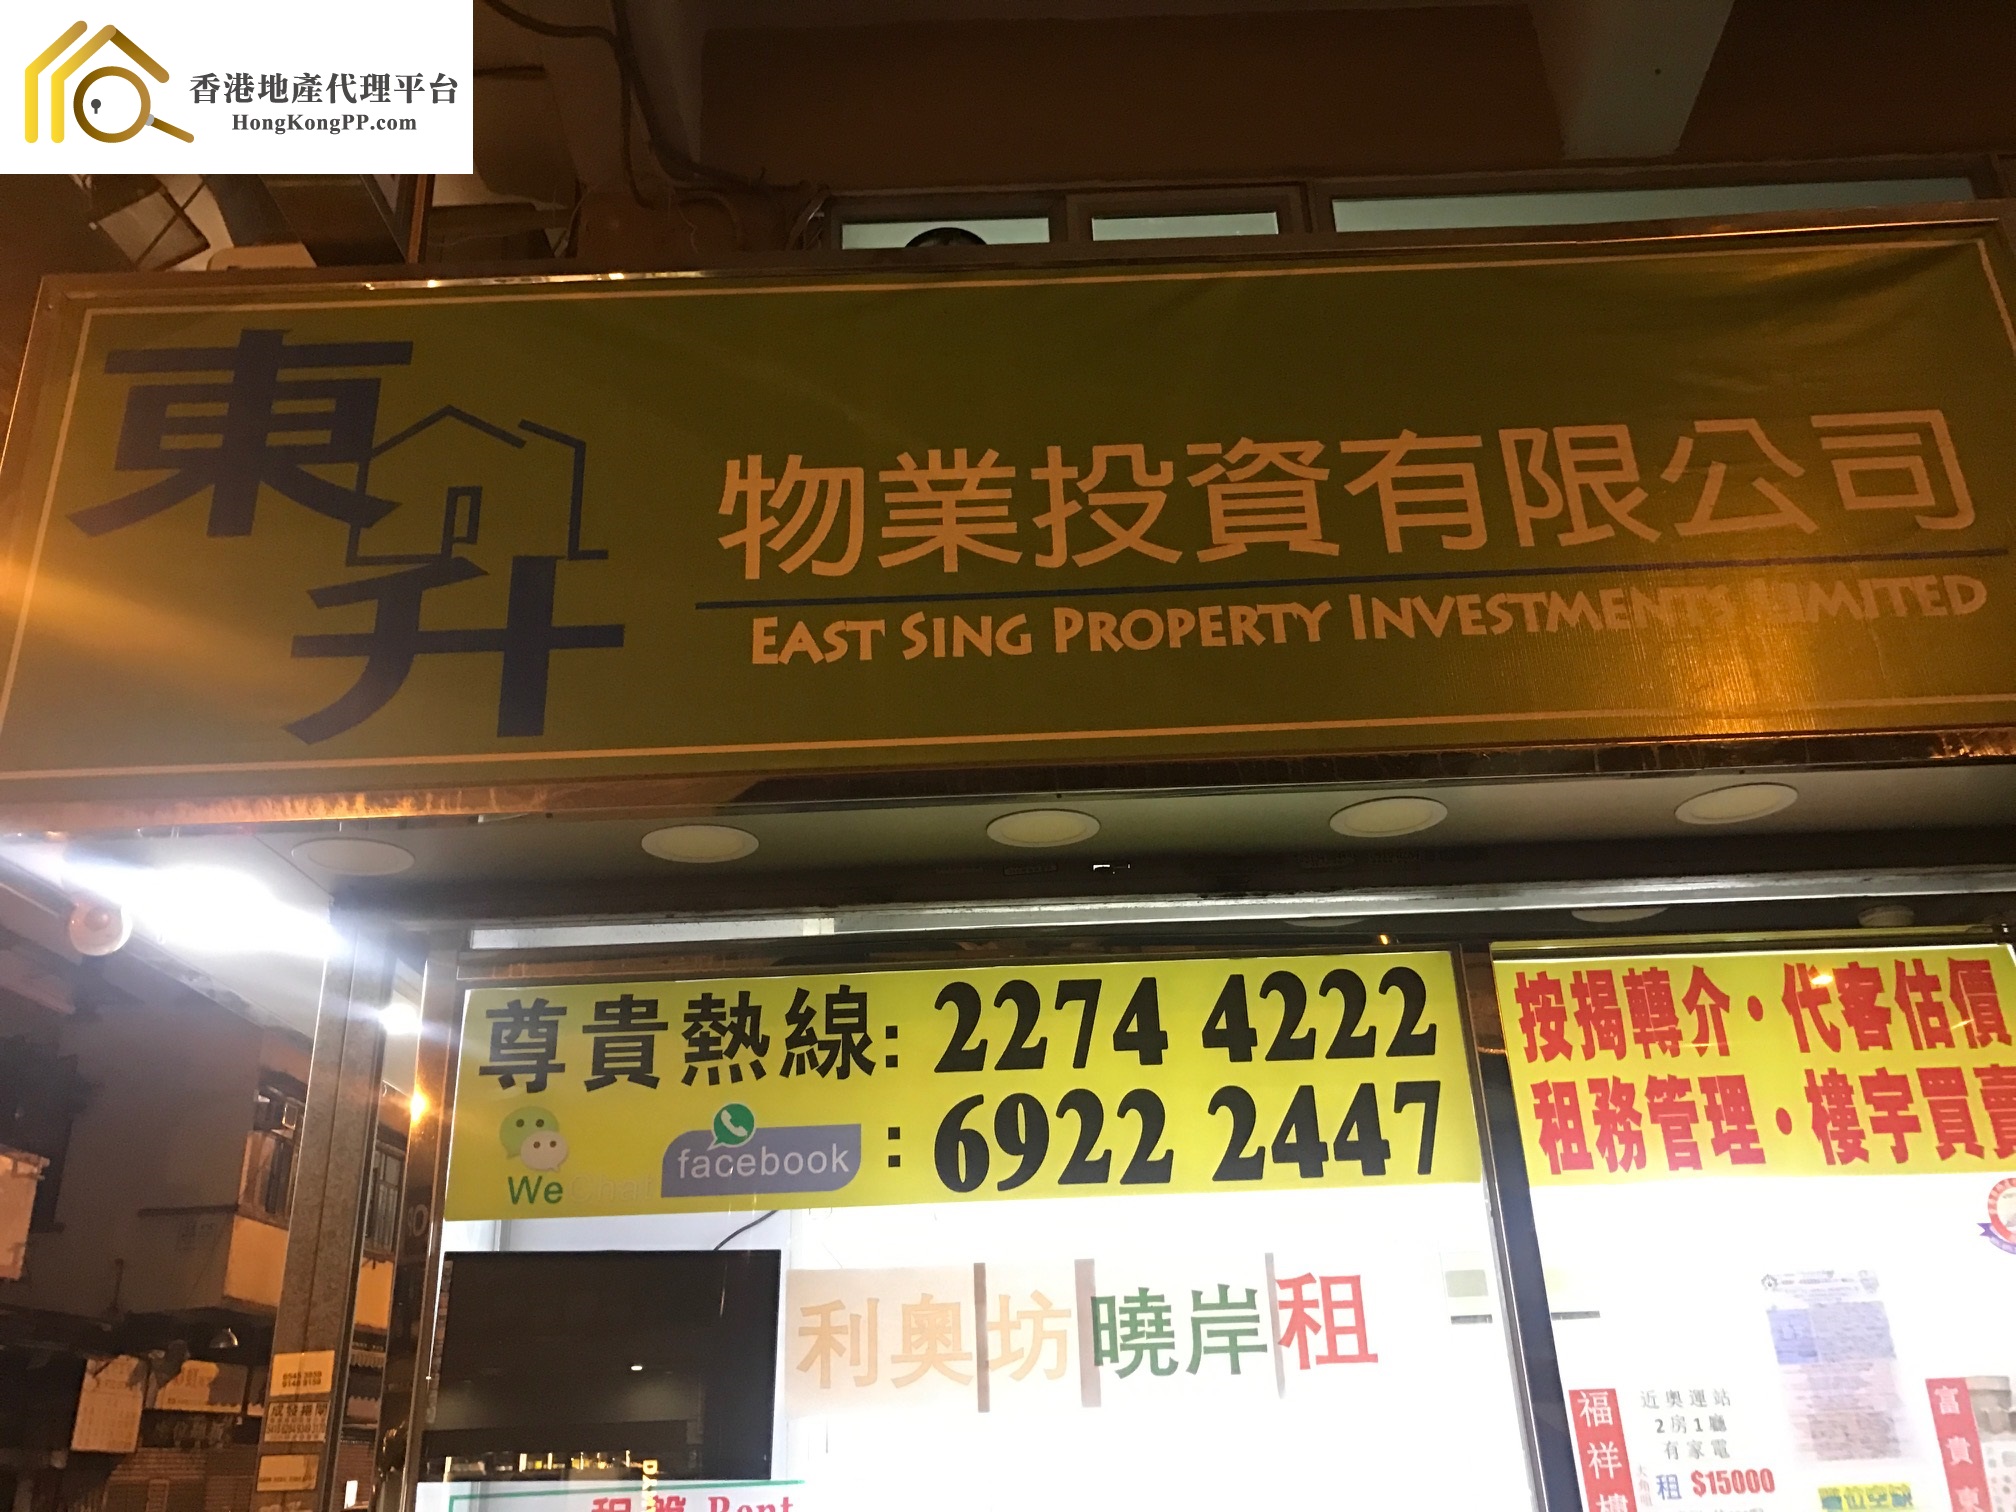 ShopEstate Agent: 東升物業投資 East Sing Property Investments